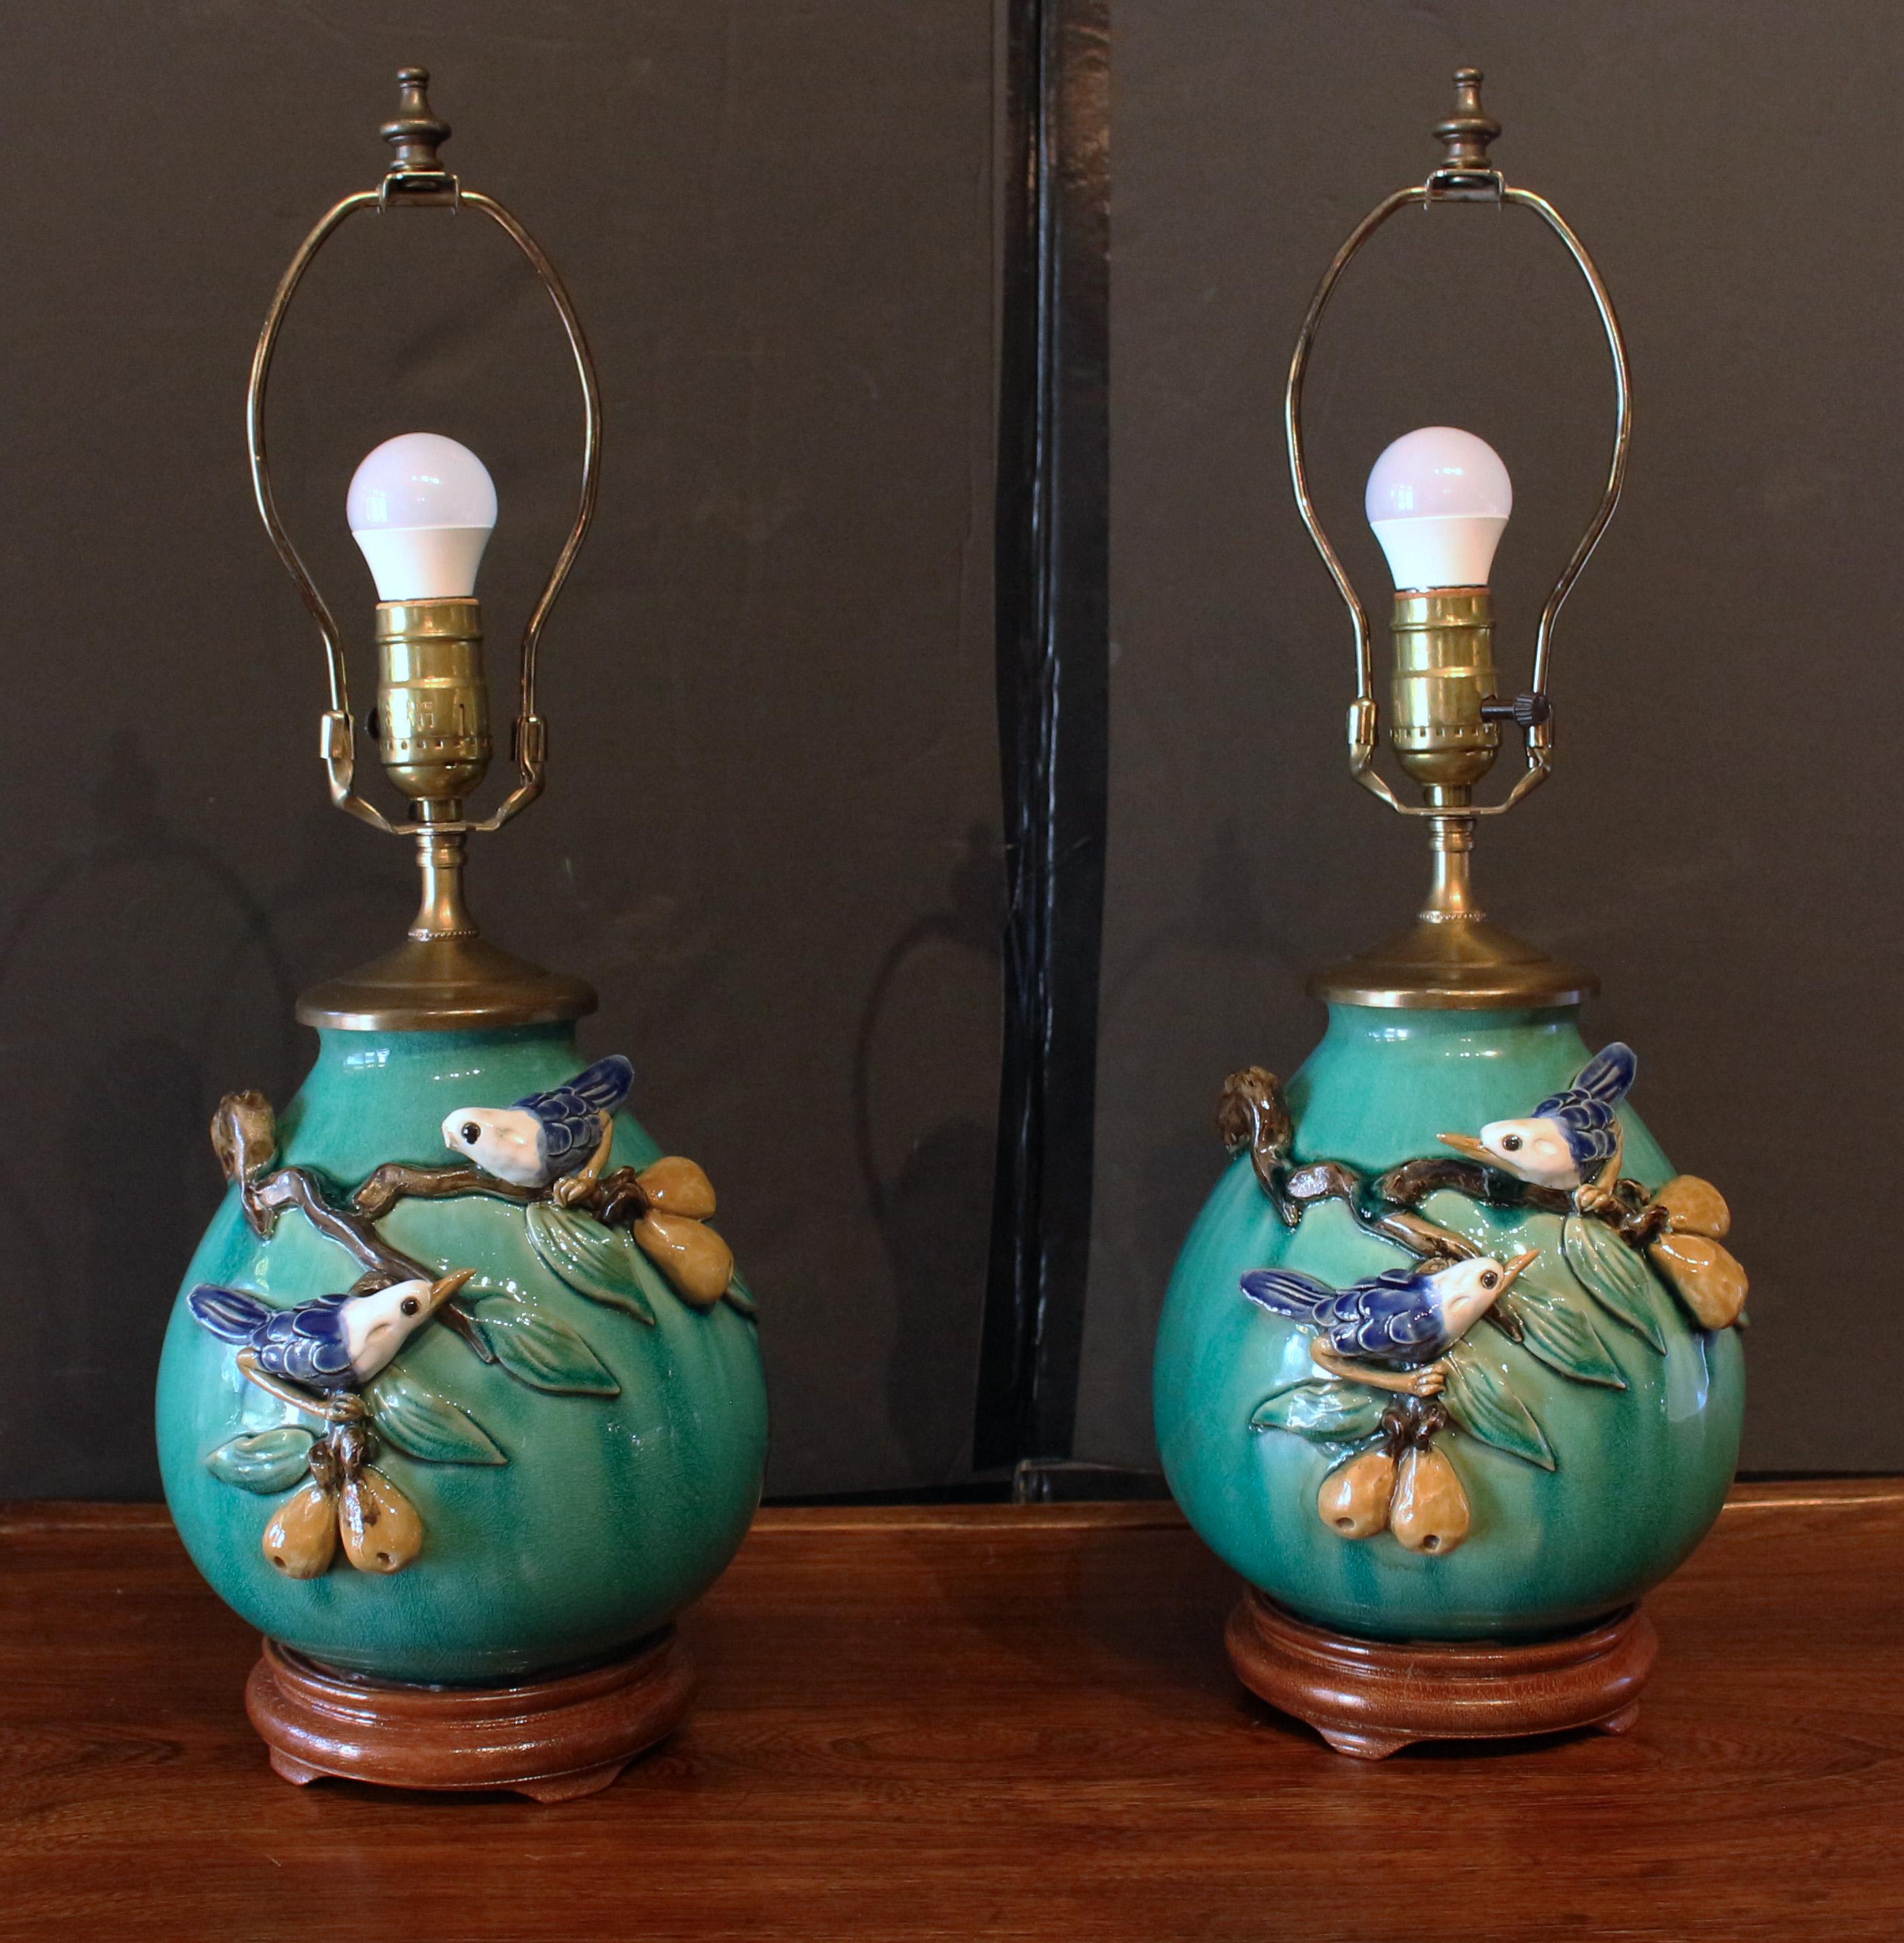 Pair of Chinese porcelain jars, now lamps, mid-20th century. Wood bases & brass caps. Each with birds on pear tree branches laden with fruit. One bird lacks beak. 14.25